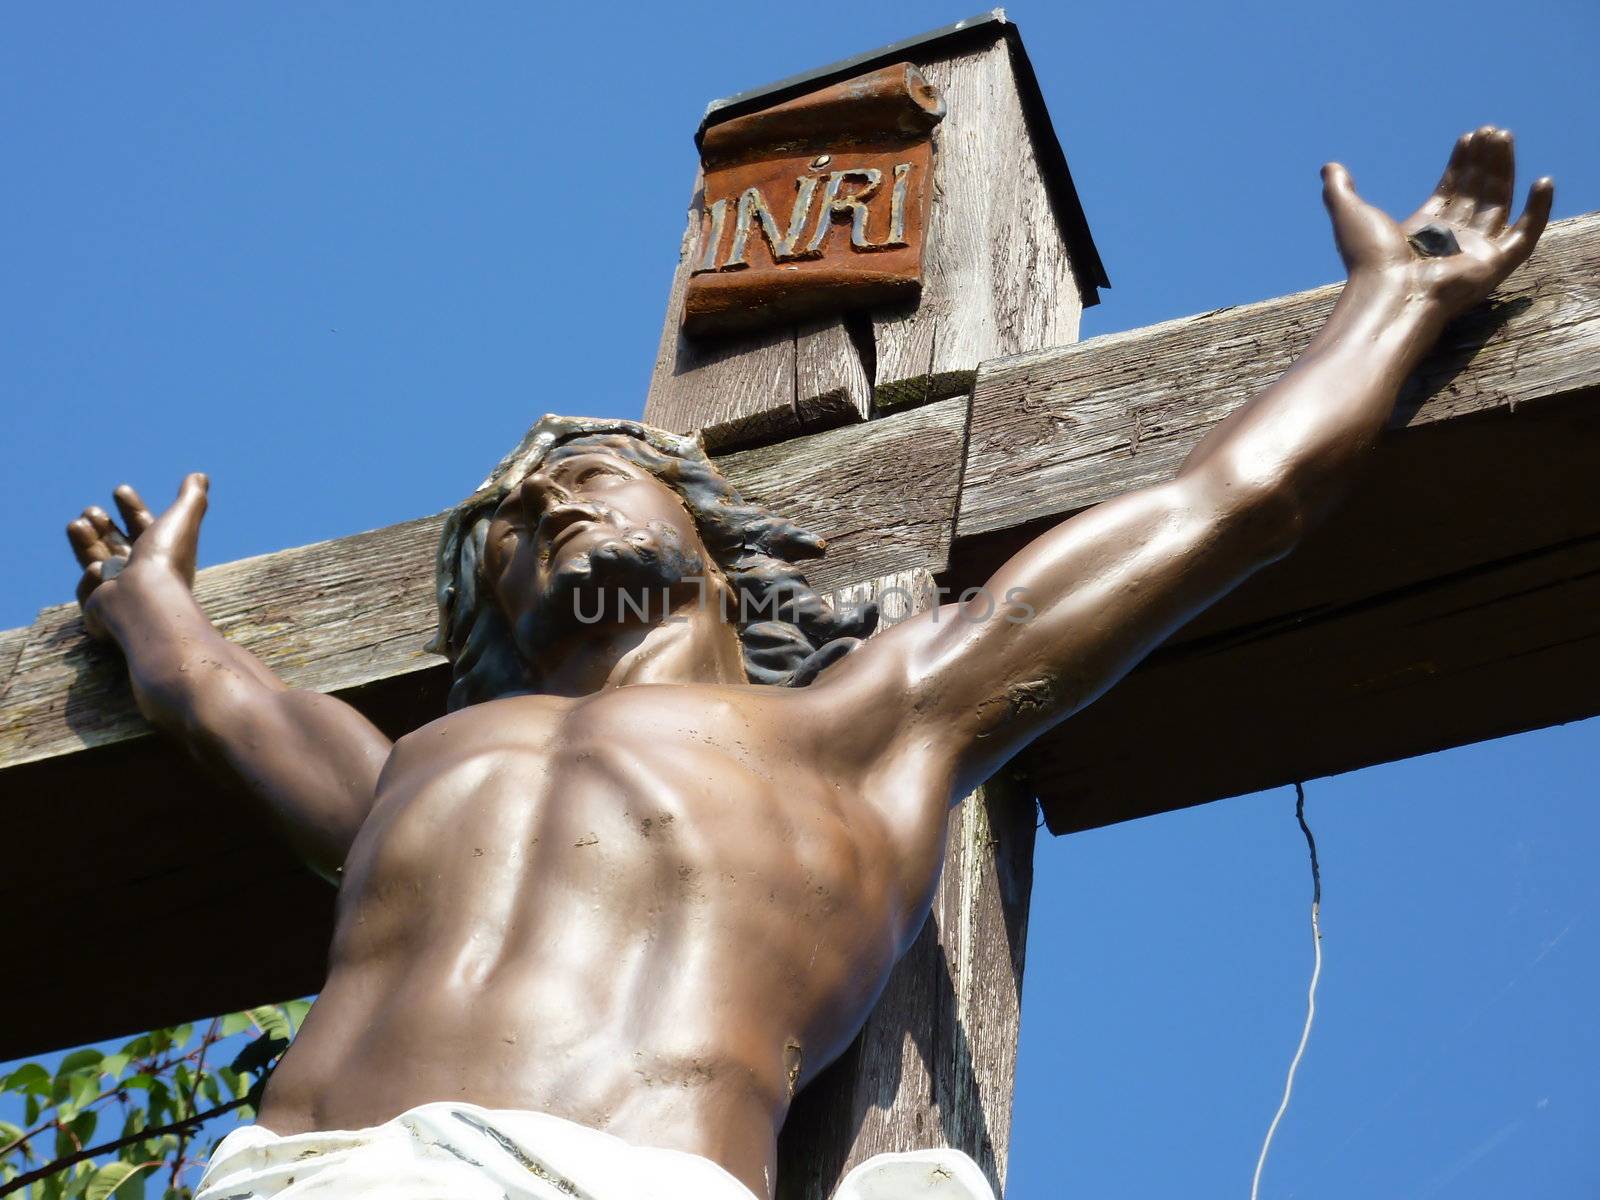 Jesus up body on a wood cross with blue sky